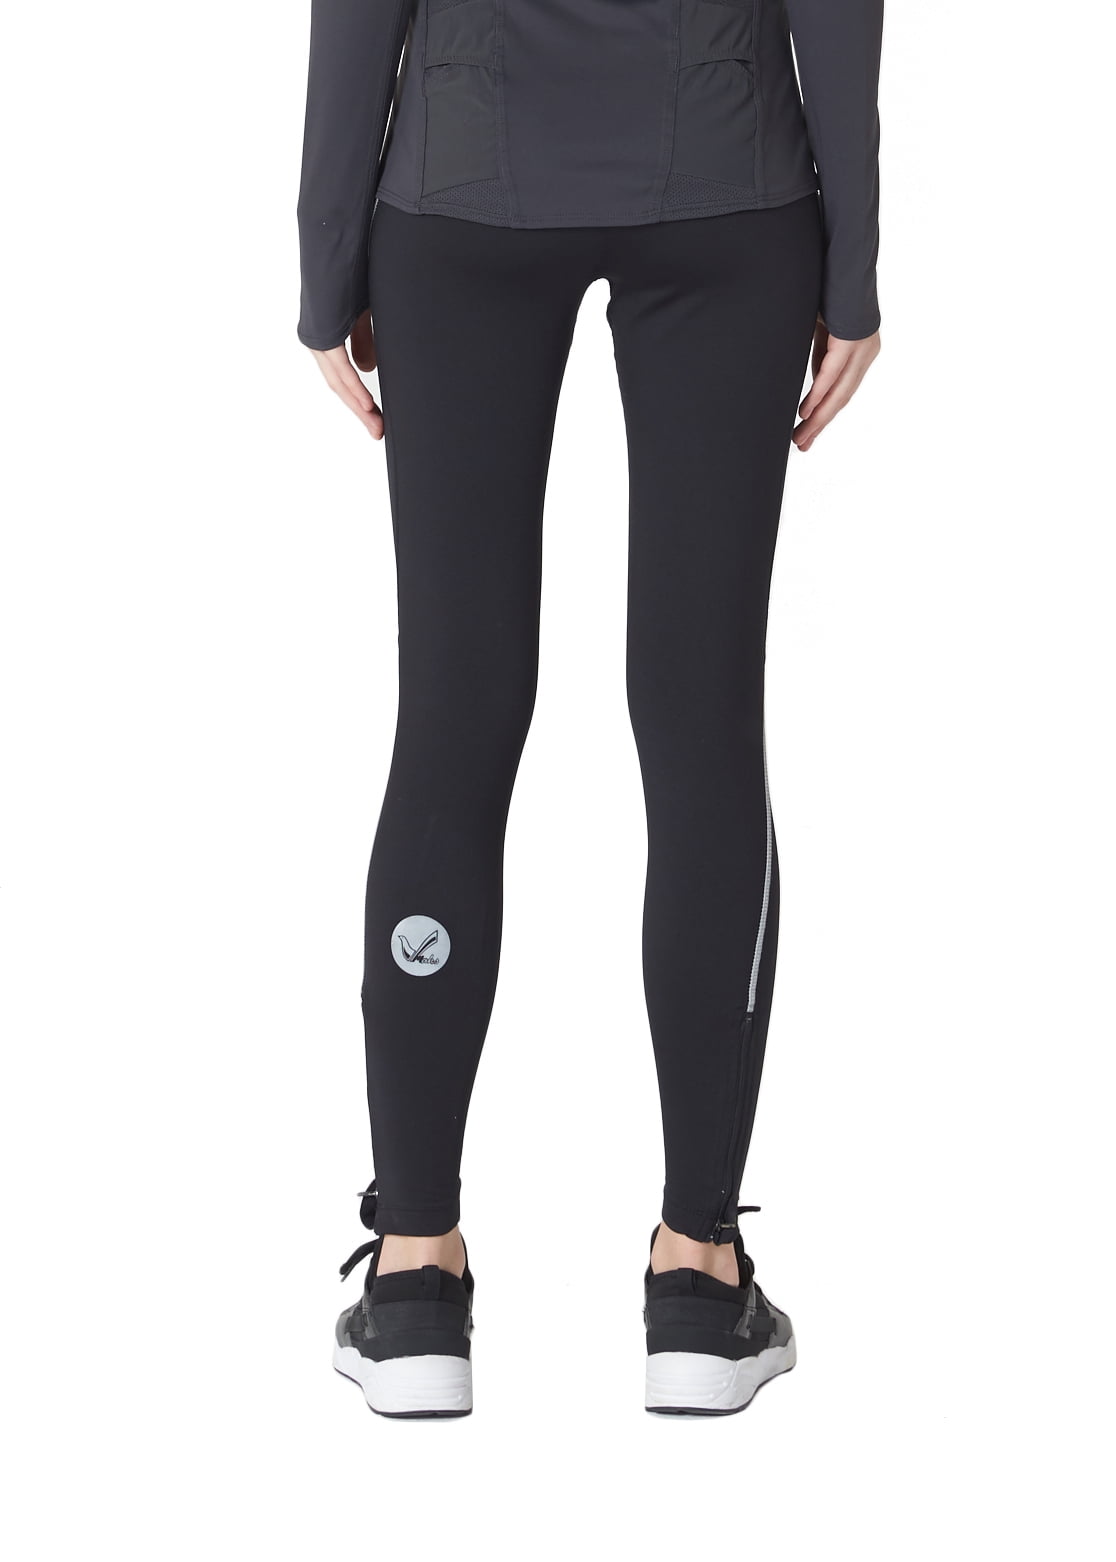 Women Elite Design Winter Thermal Running Tights Long Pants with Ankle  Zipper and Reflective Elements